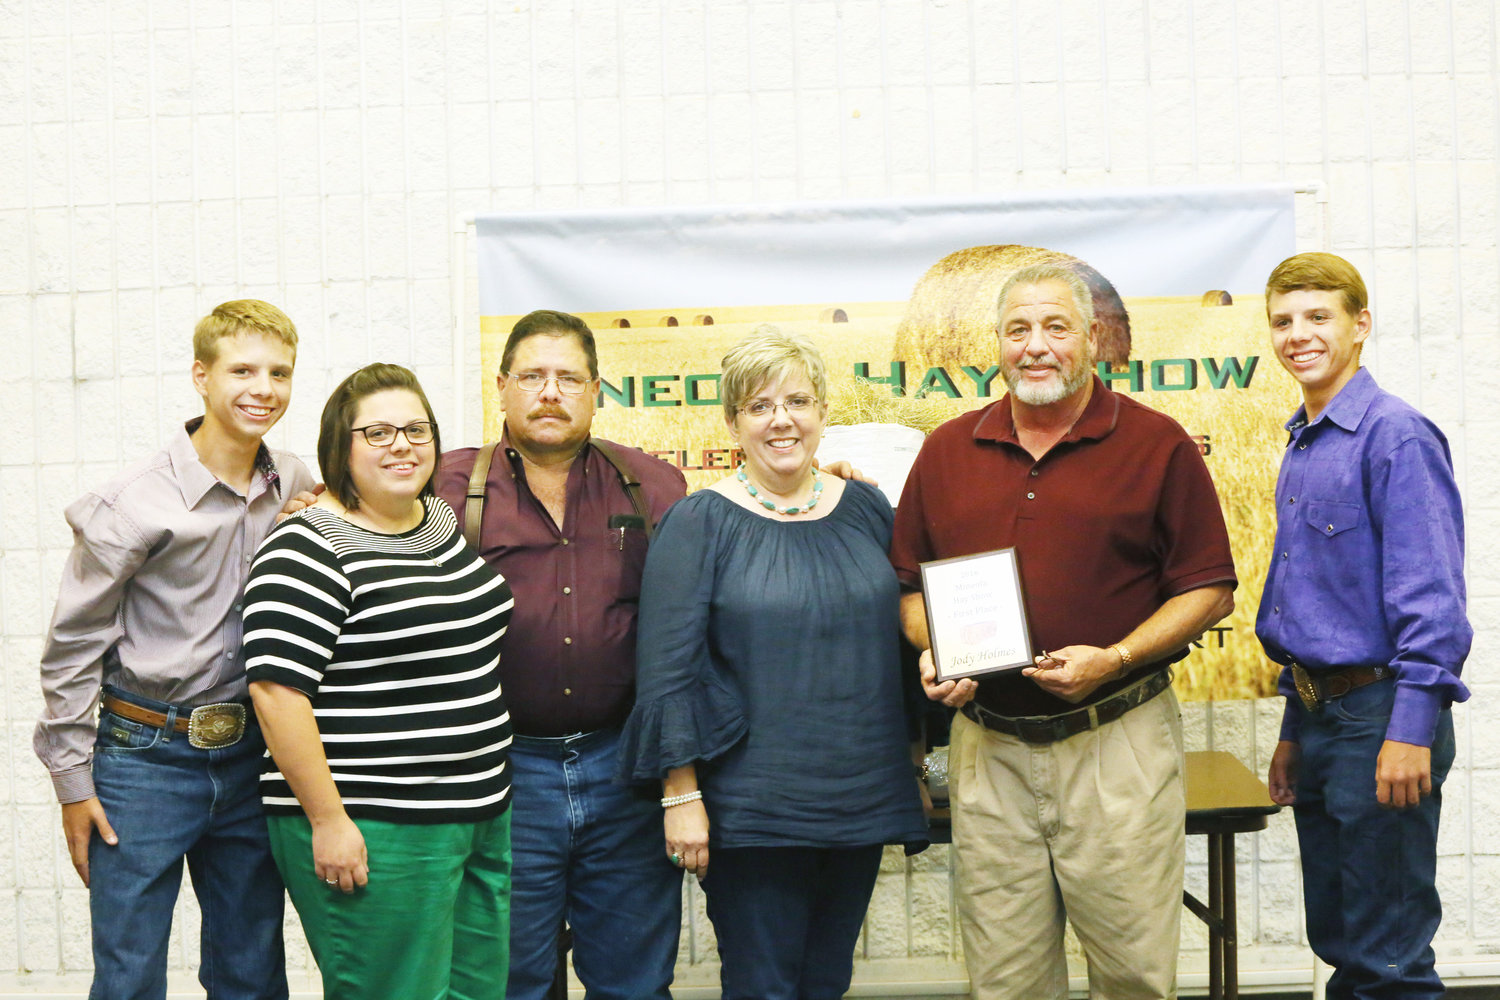 The Mineola Packing Company family continued the tradition of buying the first place hay entered in this year’s show by Jody Holmes, second from right.  The Lees are, from left, Josh, Jennifer, Jim, Susan and Jake, far right.